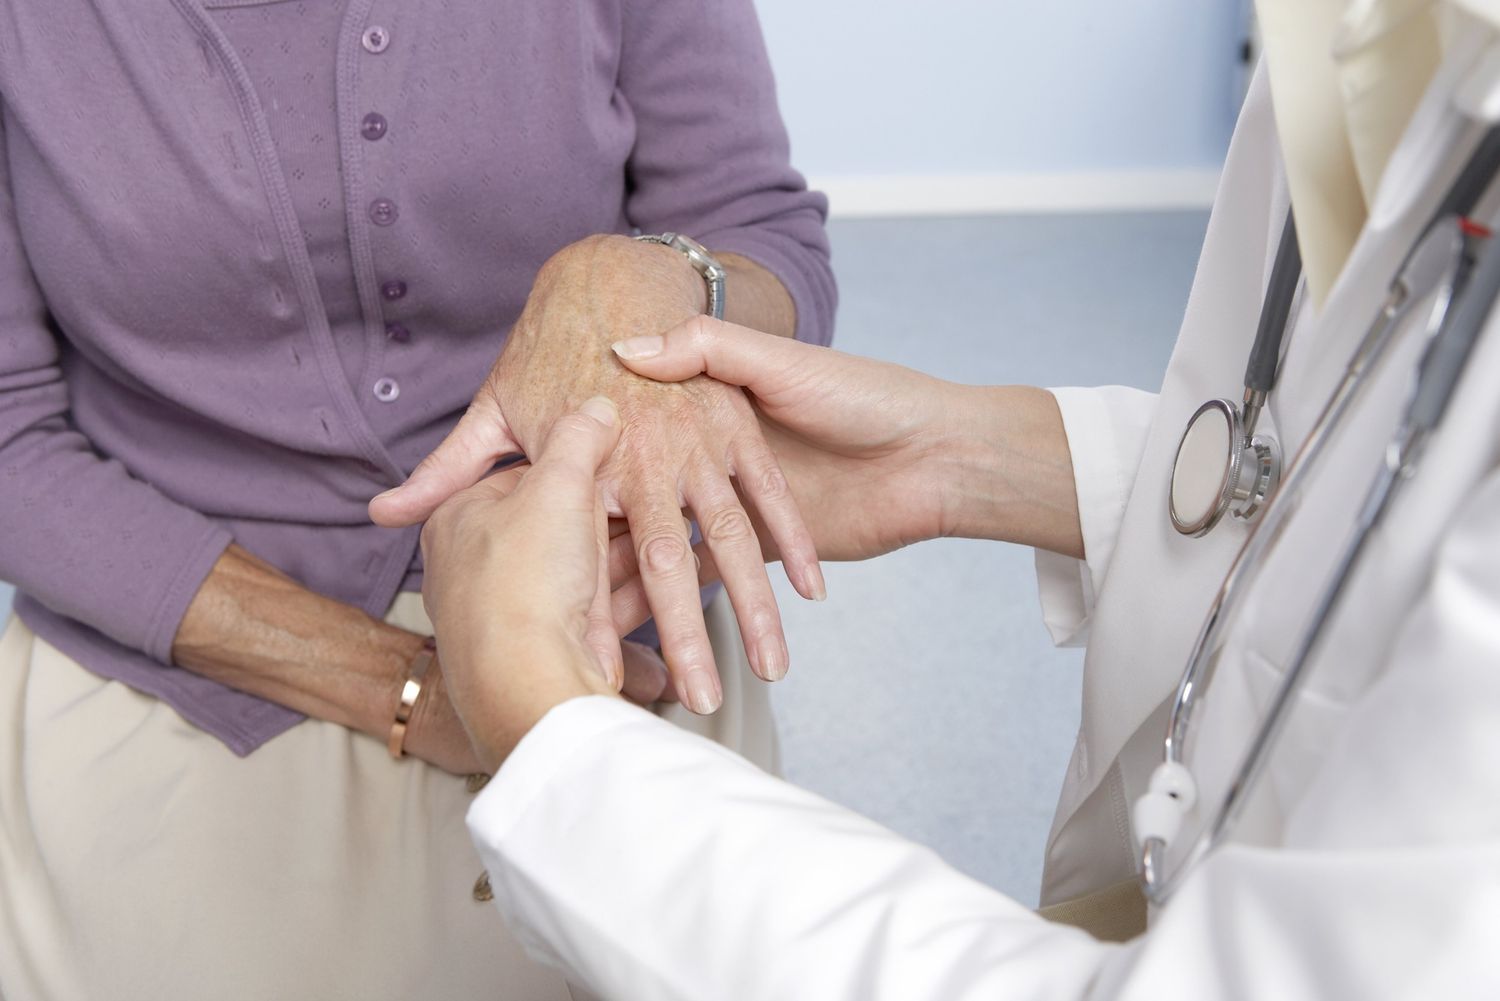 Rheumatoid arthritis, general practitioner examining patient and hand for signs of rheumatoid arthri : Stock Photo CompAdd to Board Caption:Rheumatoid arthritis. General practitioner examining a patient's hand for signs of rheumatoid arthritis. This condition is caused by the immune system attacking the body's own tissues, causing progressive joint and cartilage destruction. As the cartilage is worn away, new bone grows as part of the repair process. This causes stiffness and deformity of the fingers. Treatment is with anti-inflammatory drugs and physiotherapy. Rheumatoid arthritis, general practitioner examining patient and hand for signs of rheumatoid arthritis